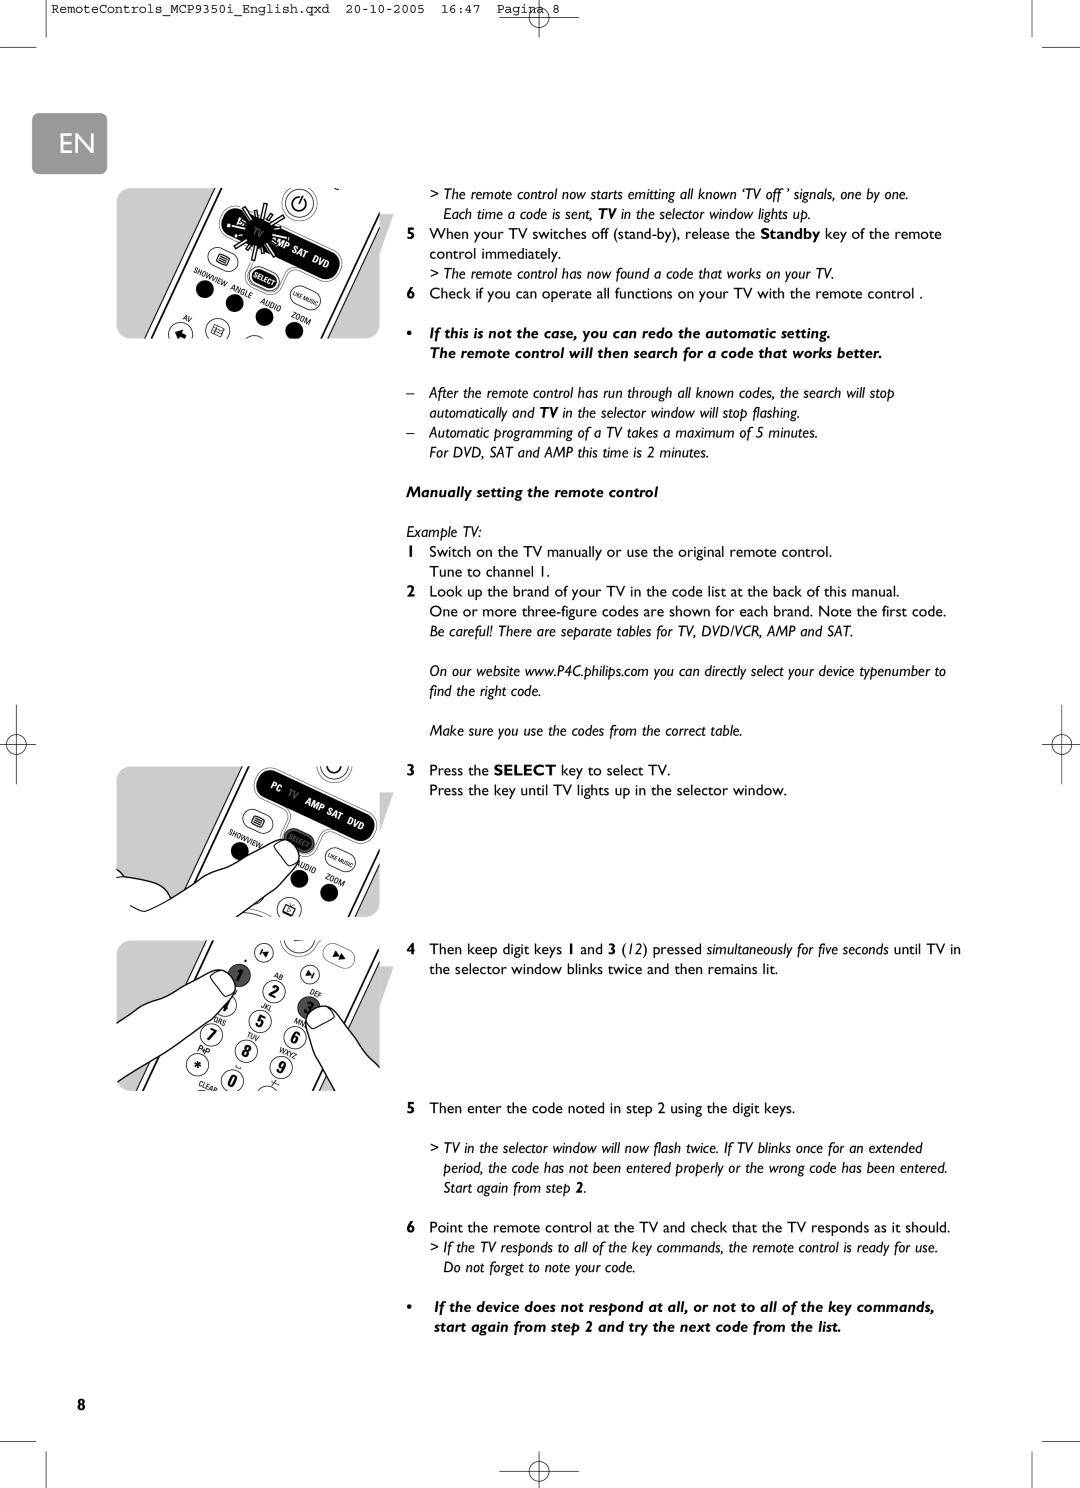 Philips RC4370 user manual If this is not the case, you can redo the automatic setting, Manually setting the remote control 